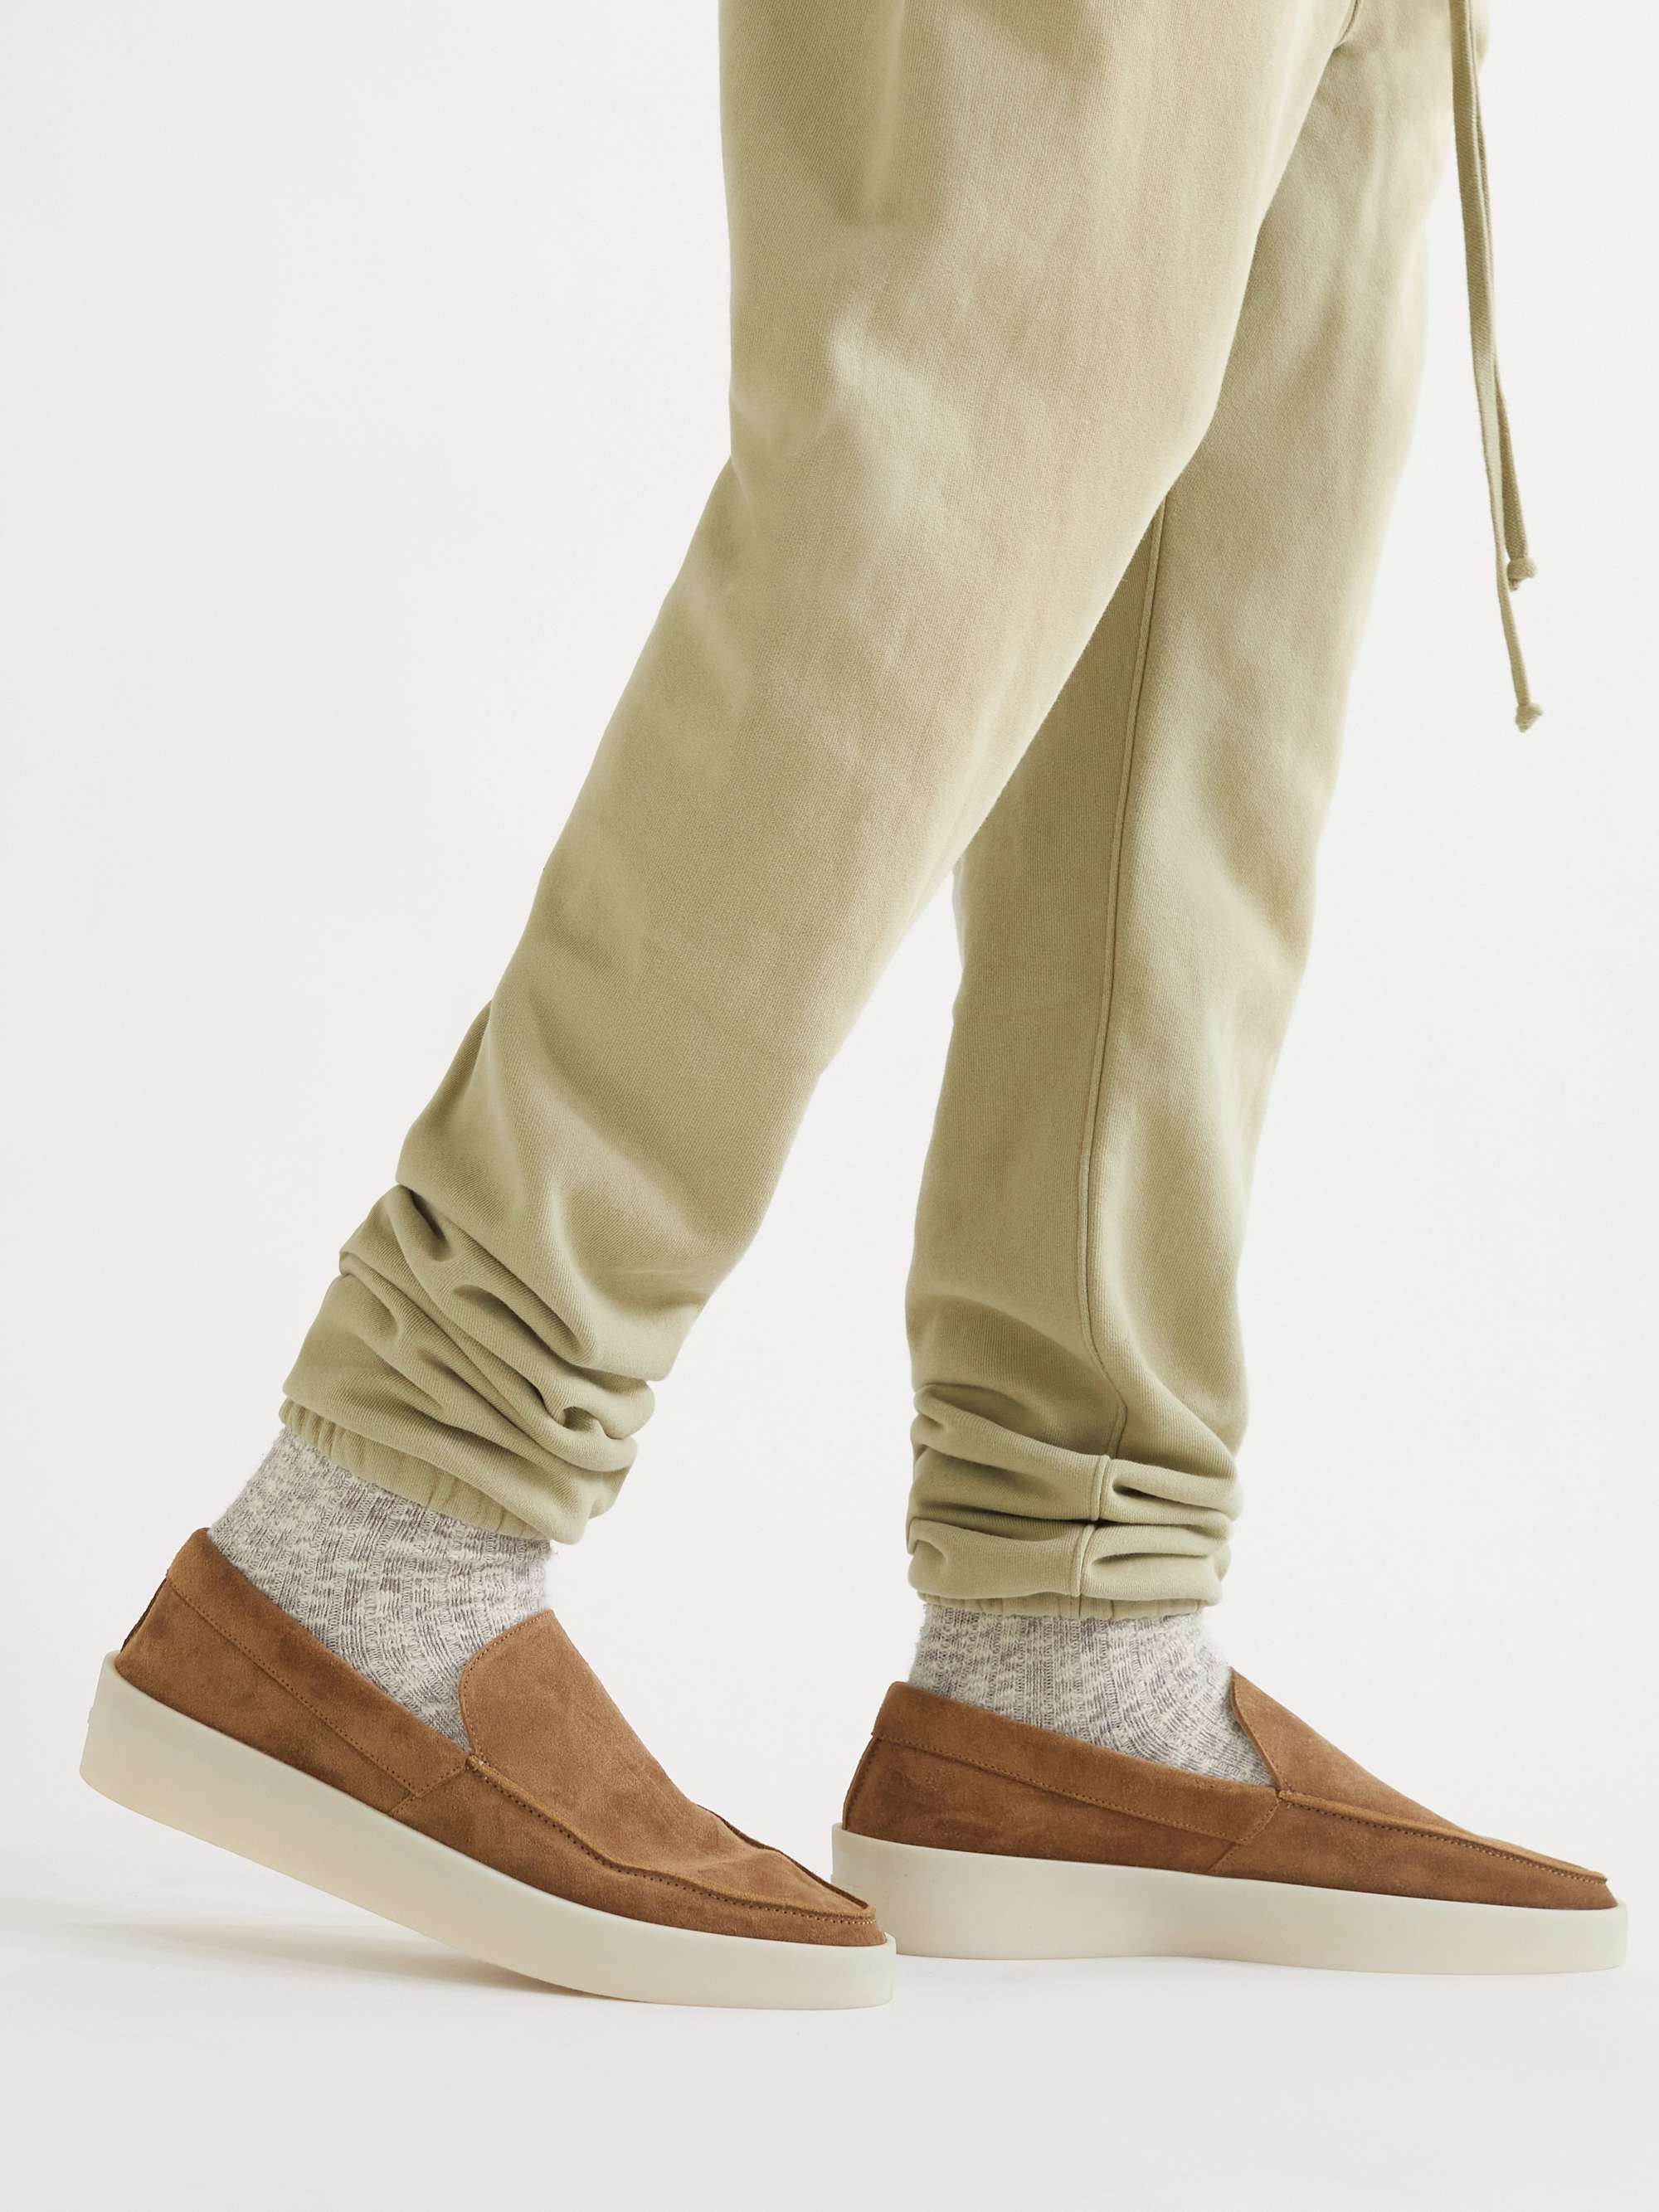 FEAR OF GOD Reverse Suede Loafers